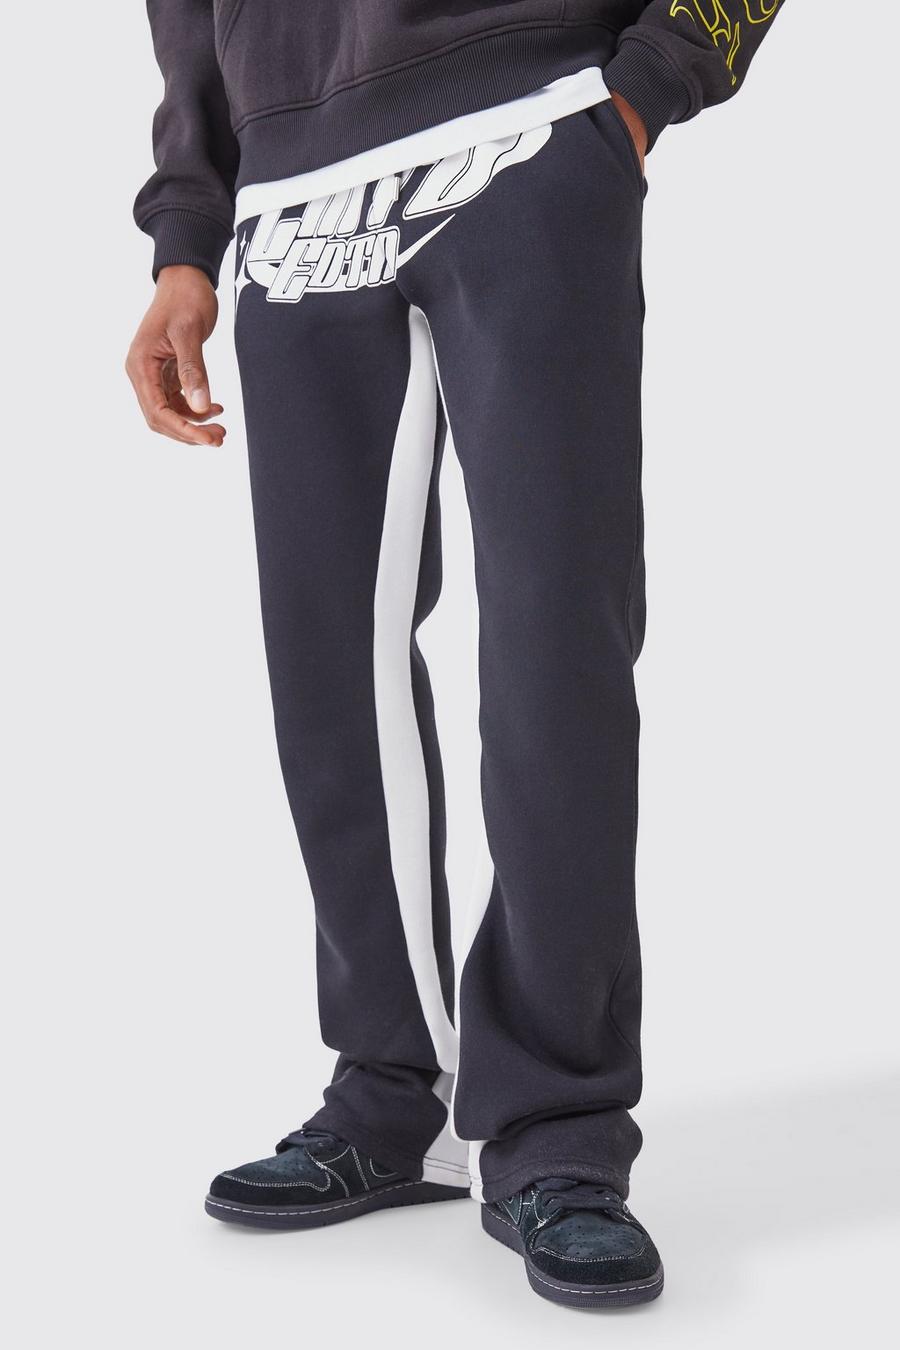 Black Limited Edition Stacked Gusset Sweatpants